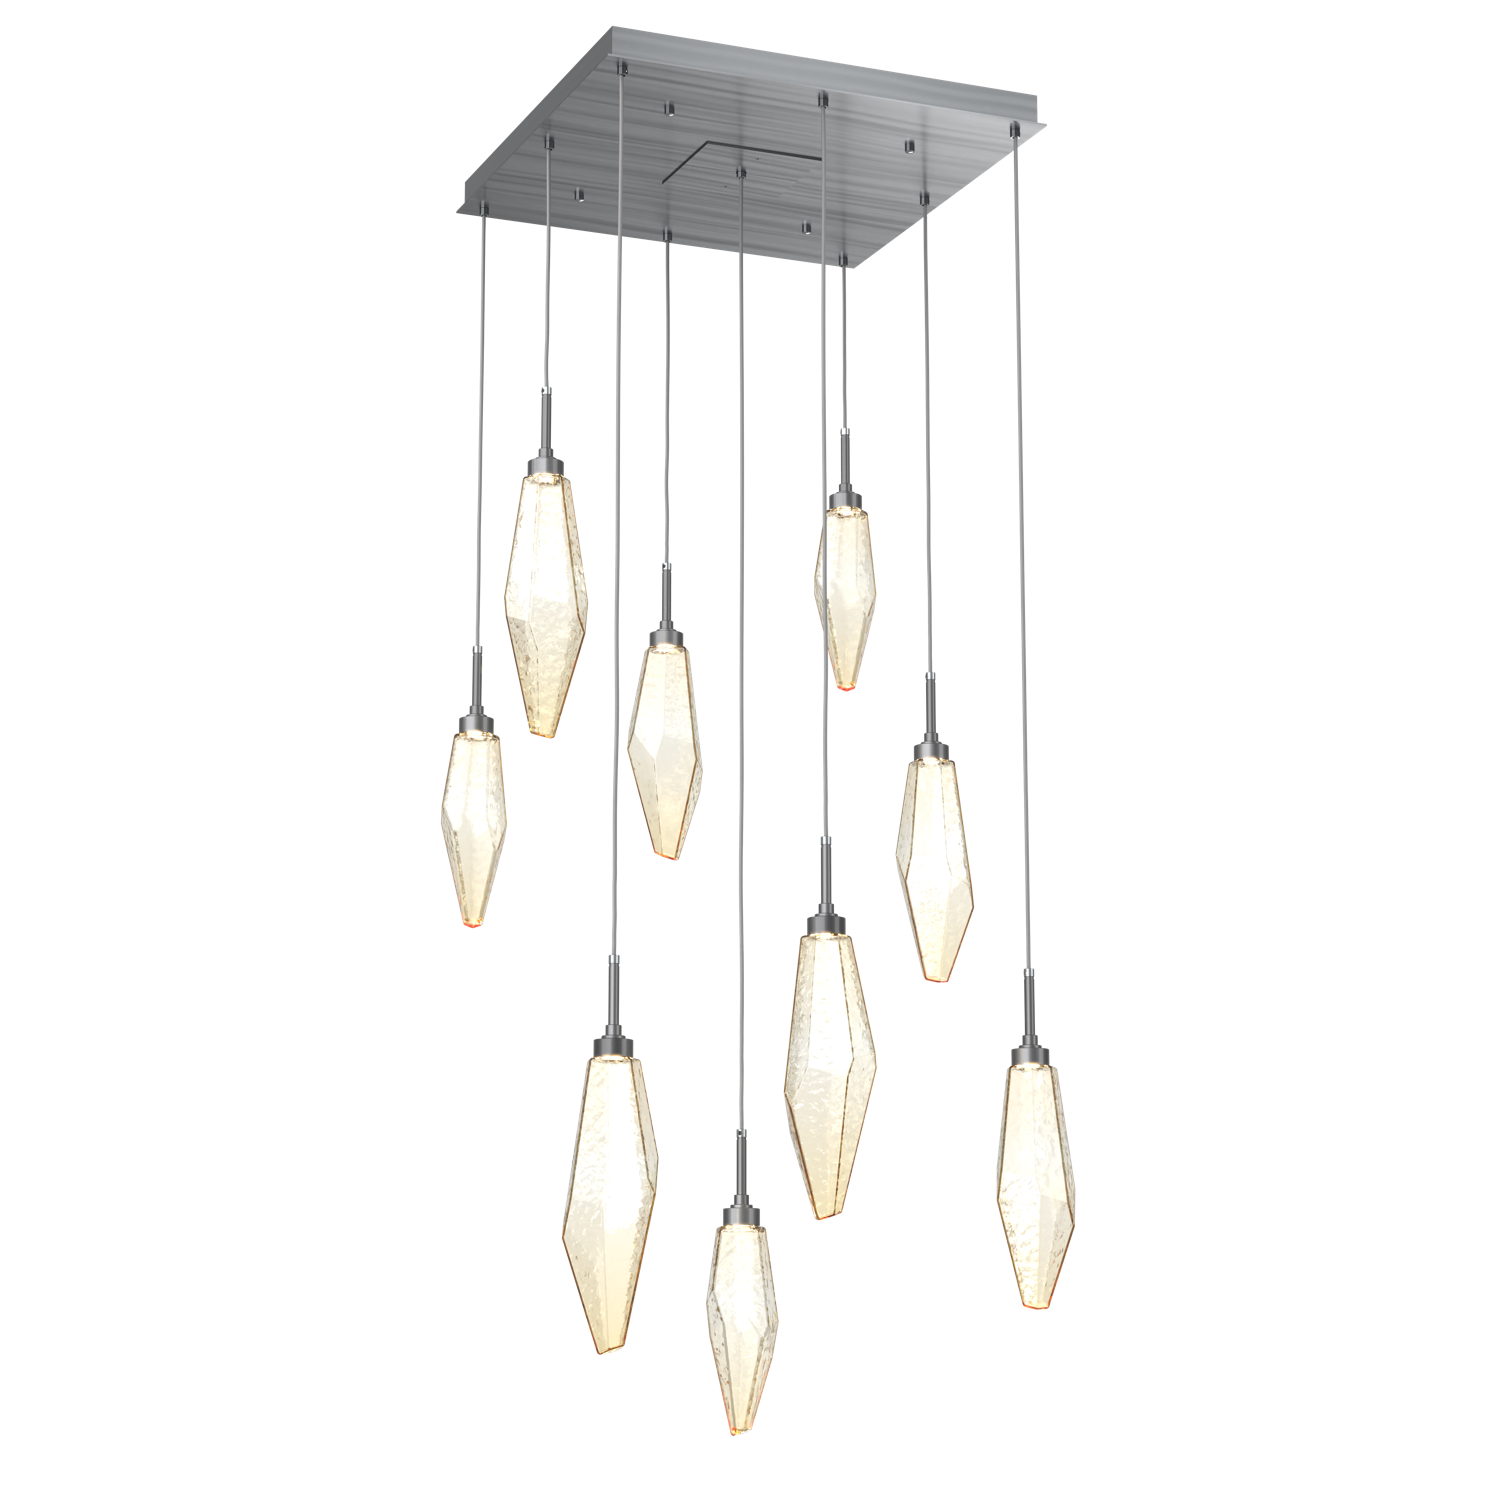 CHB0050-09-GM-CA-Hammerton-Studio-Rock-Crystal-9-light-square-pendant-chandelier-with-gunmetal-finish-and-chilled-amber-blown-glass-shades-and-LED-lamping